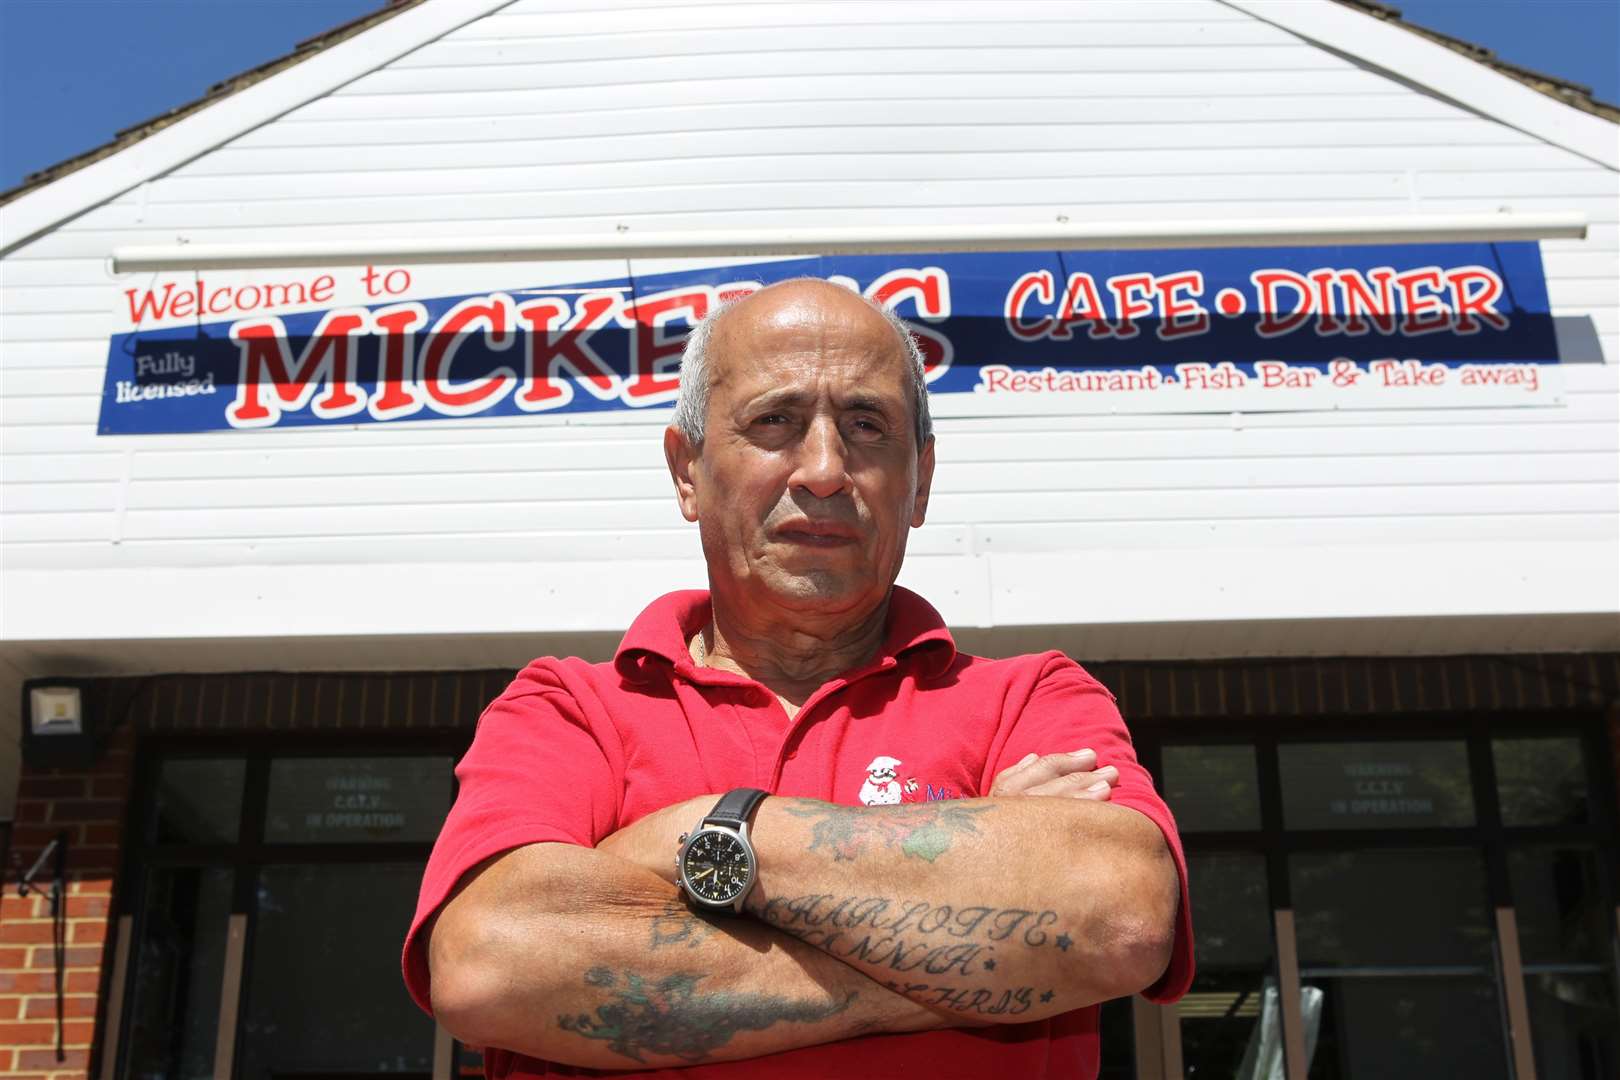 Michael Schembri, founder of Mickey's Diner